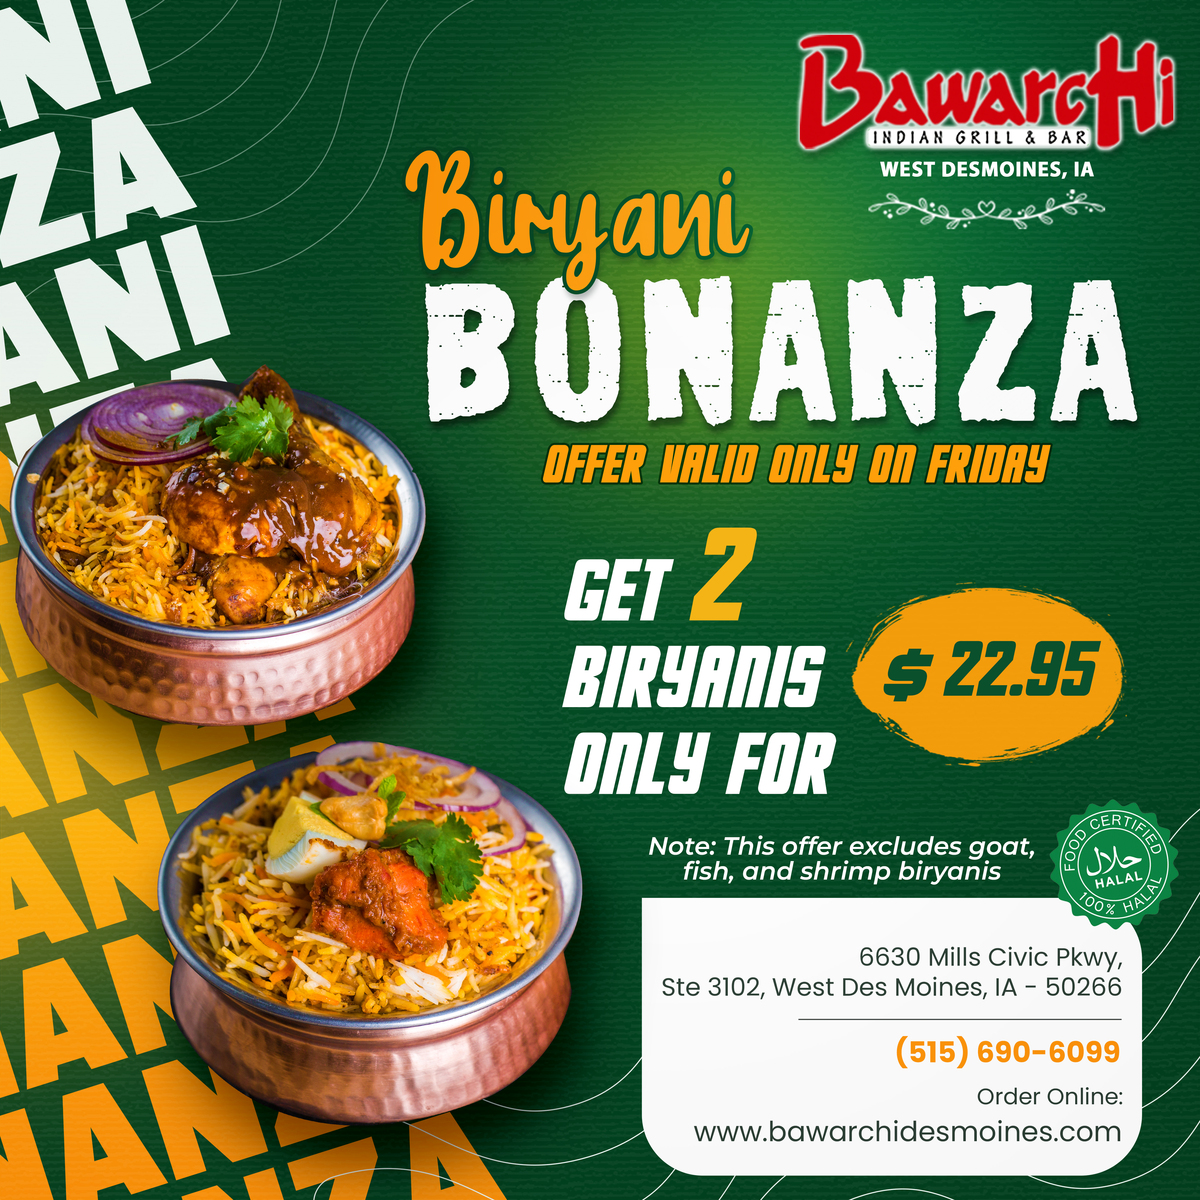 Get 2 Biryanis for just $22.95! Offer valid exclusively on Fridays!